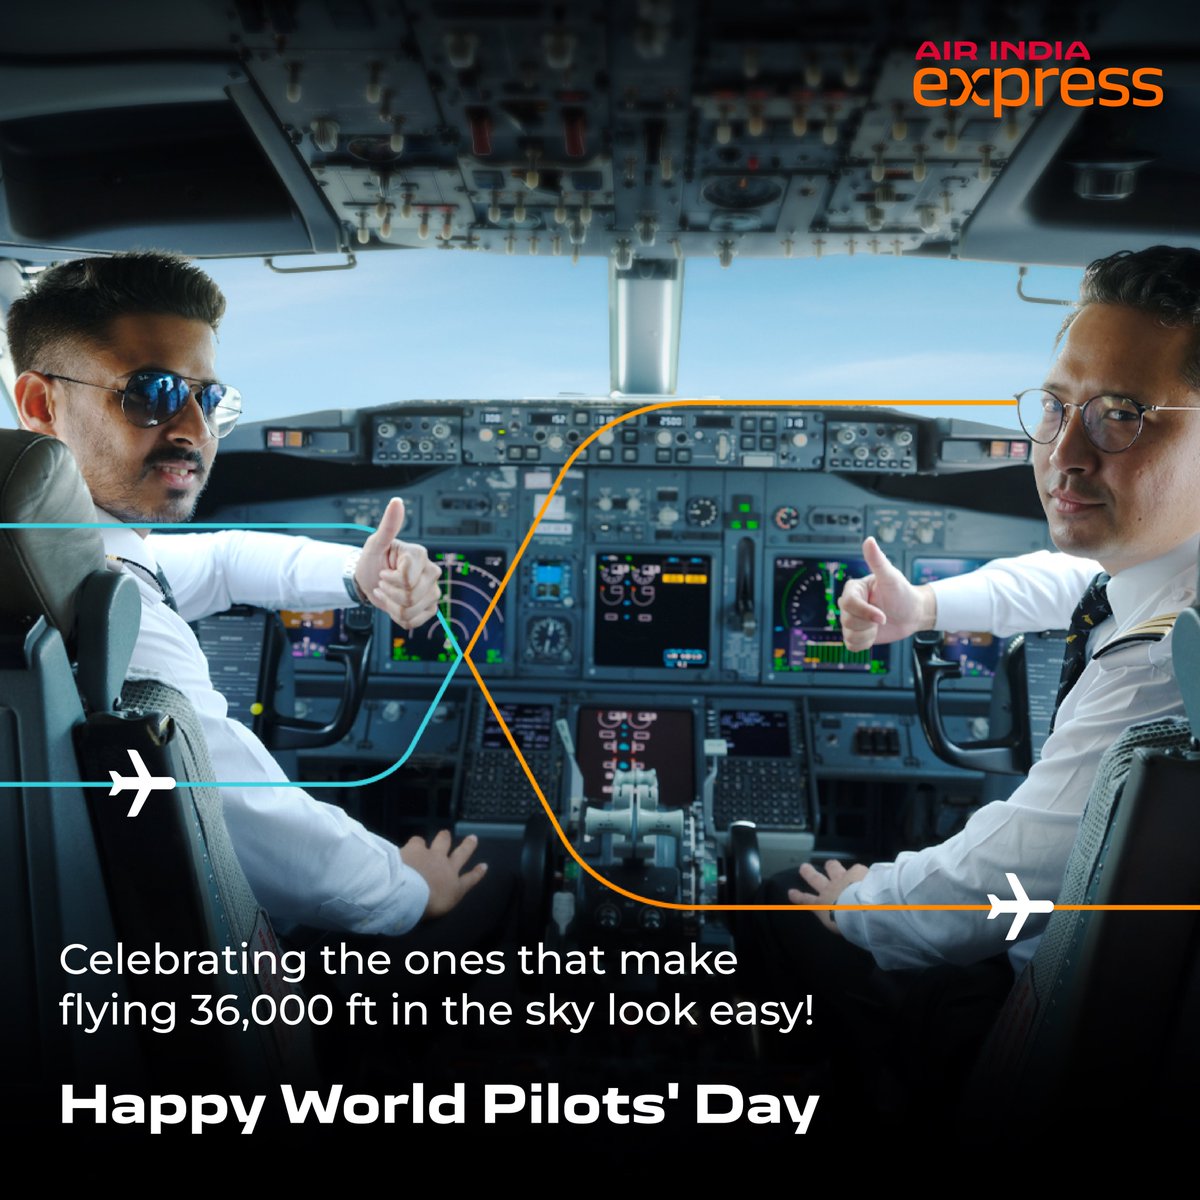 👨‍✈️🛫 From navigating with precision to making meaningful connections, our pilots inspire us with their dedication in the skies. ✈️🥳🙌 Thank you for keeping our journeys safe and memorable. Let's celebrate their unwavering commitment this #WorldPilotsDay!